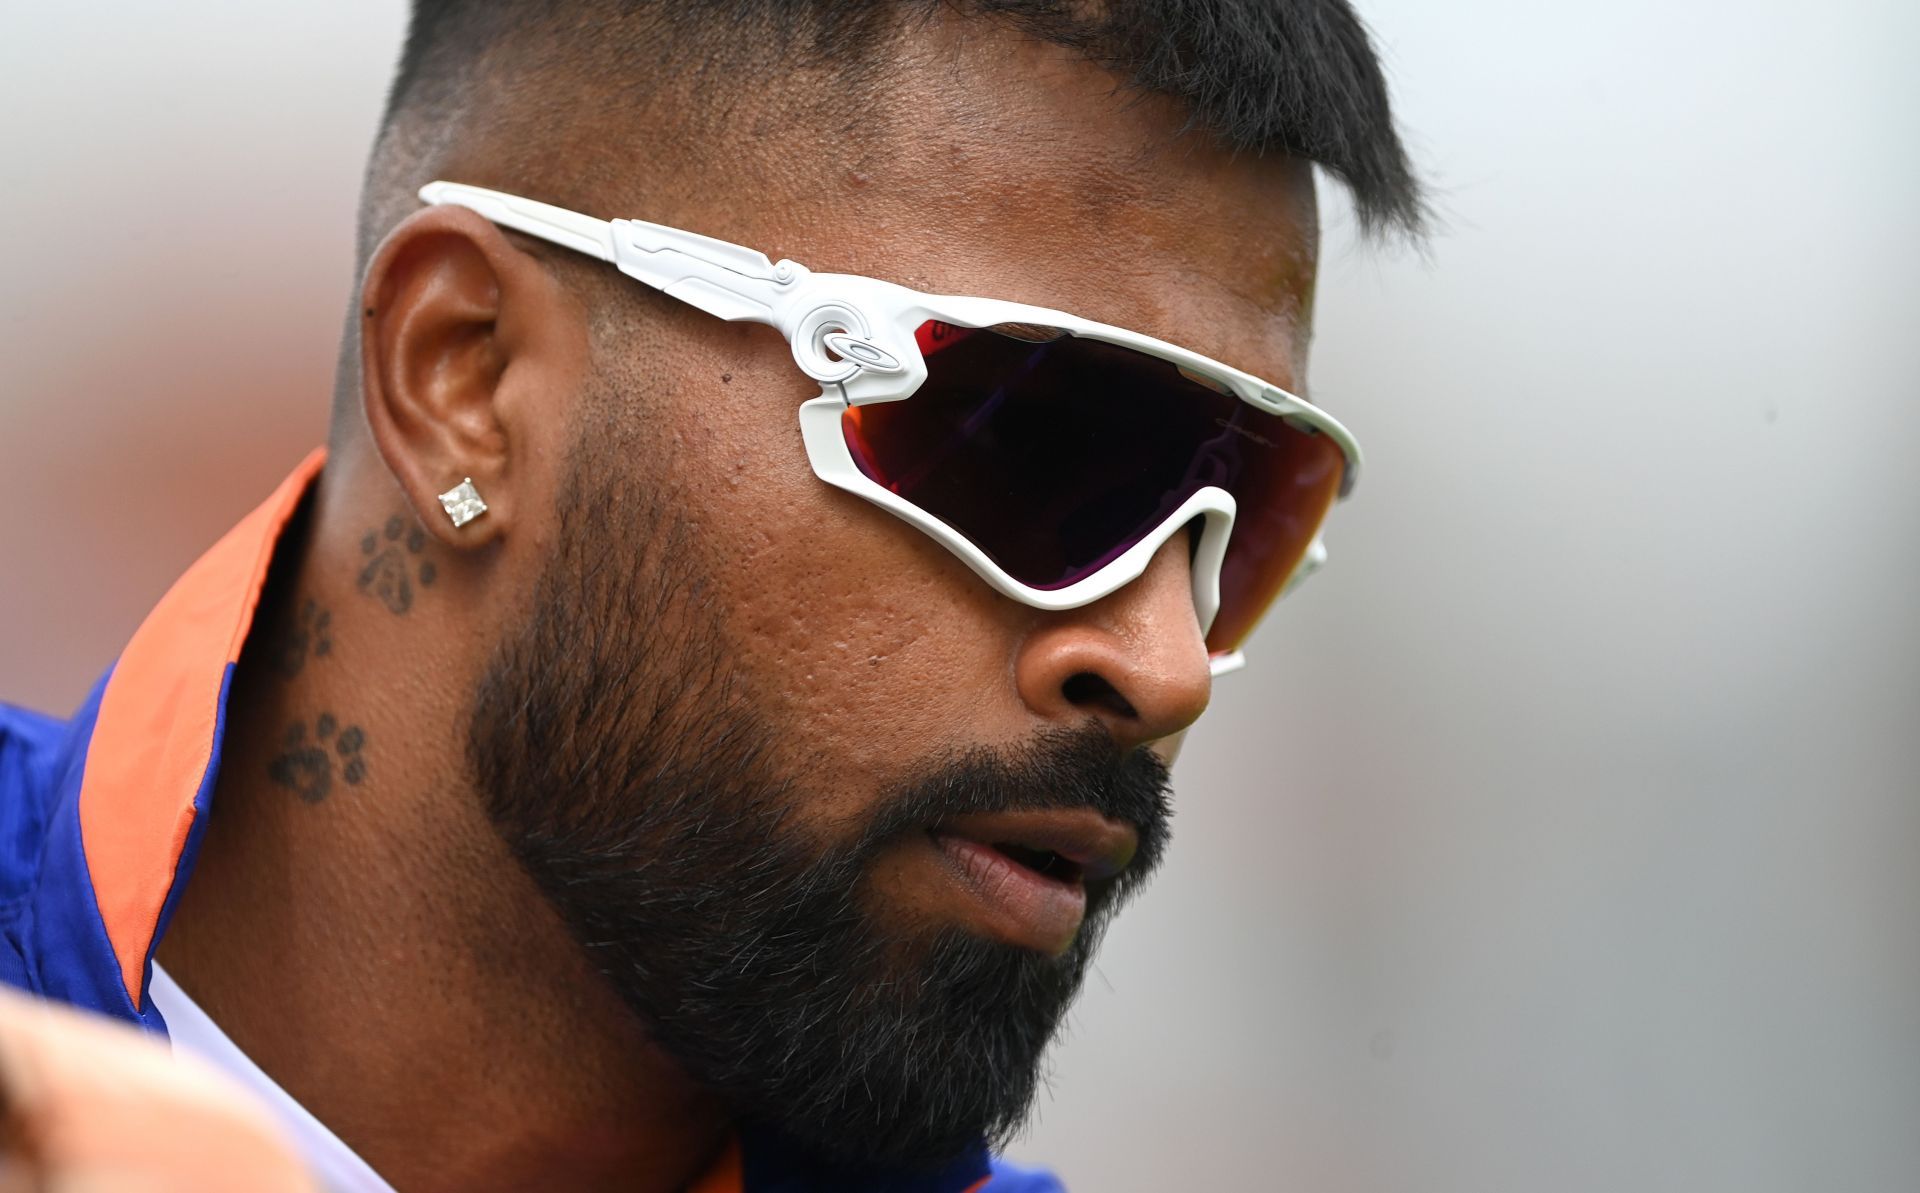 Hardik Pandya worked on his fitness after the 2021 T20 World Cup.